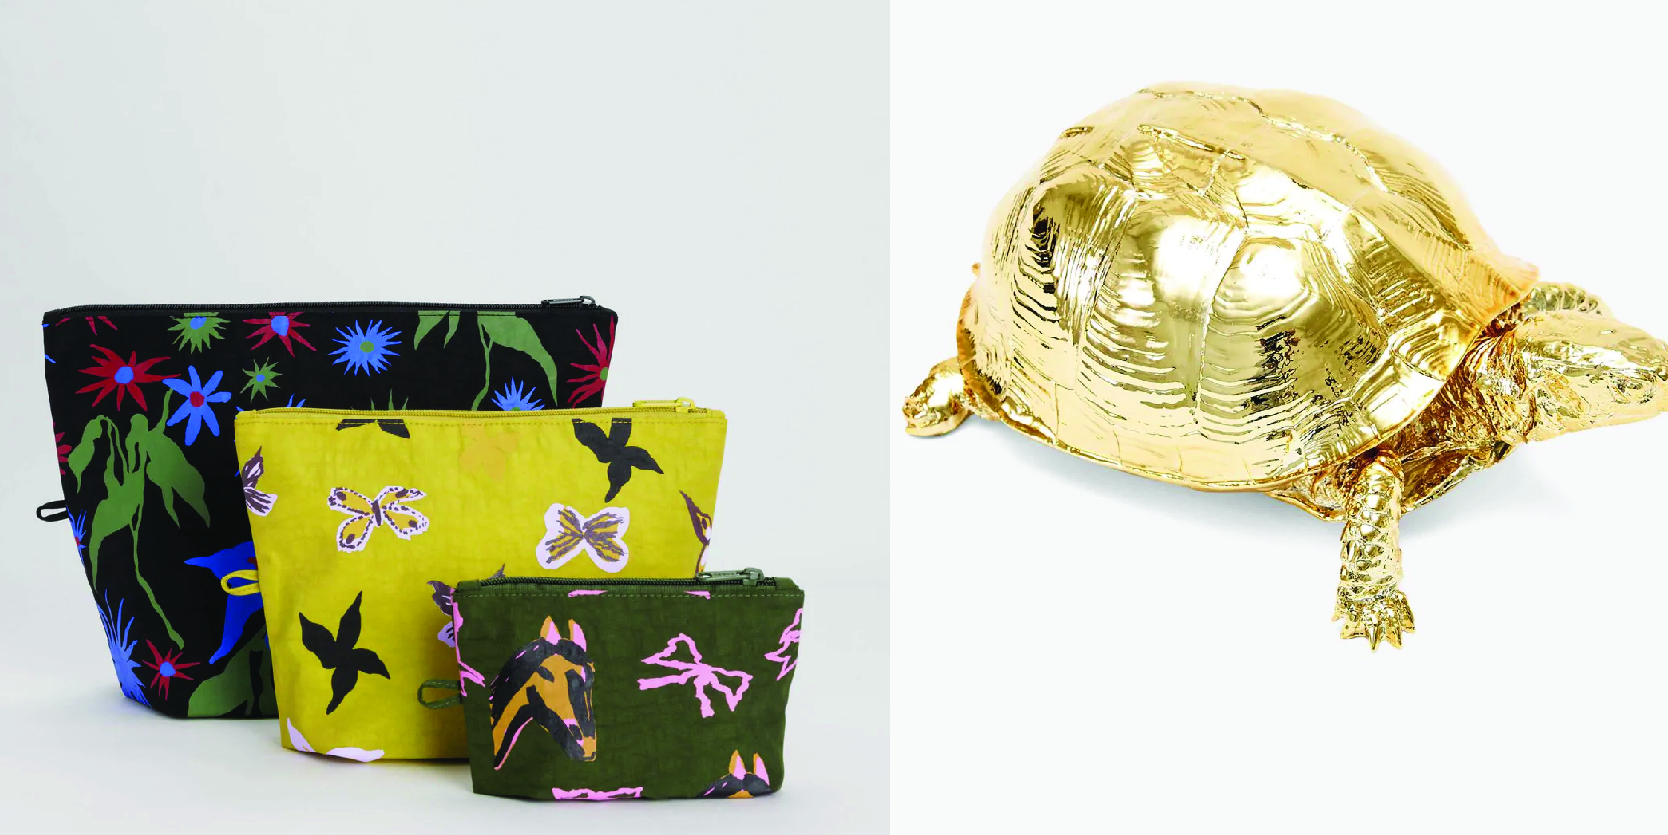 Two photos: one of a gold turtle box and one of a pouch set.